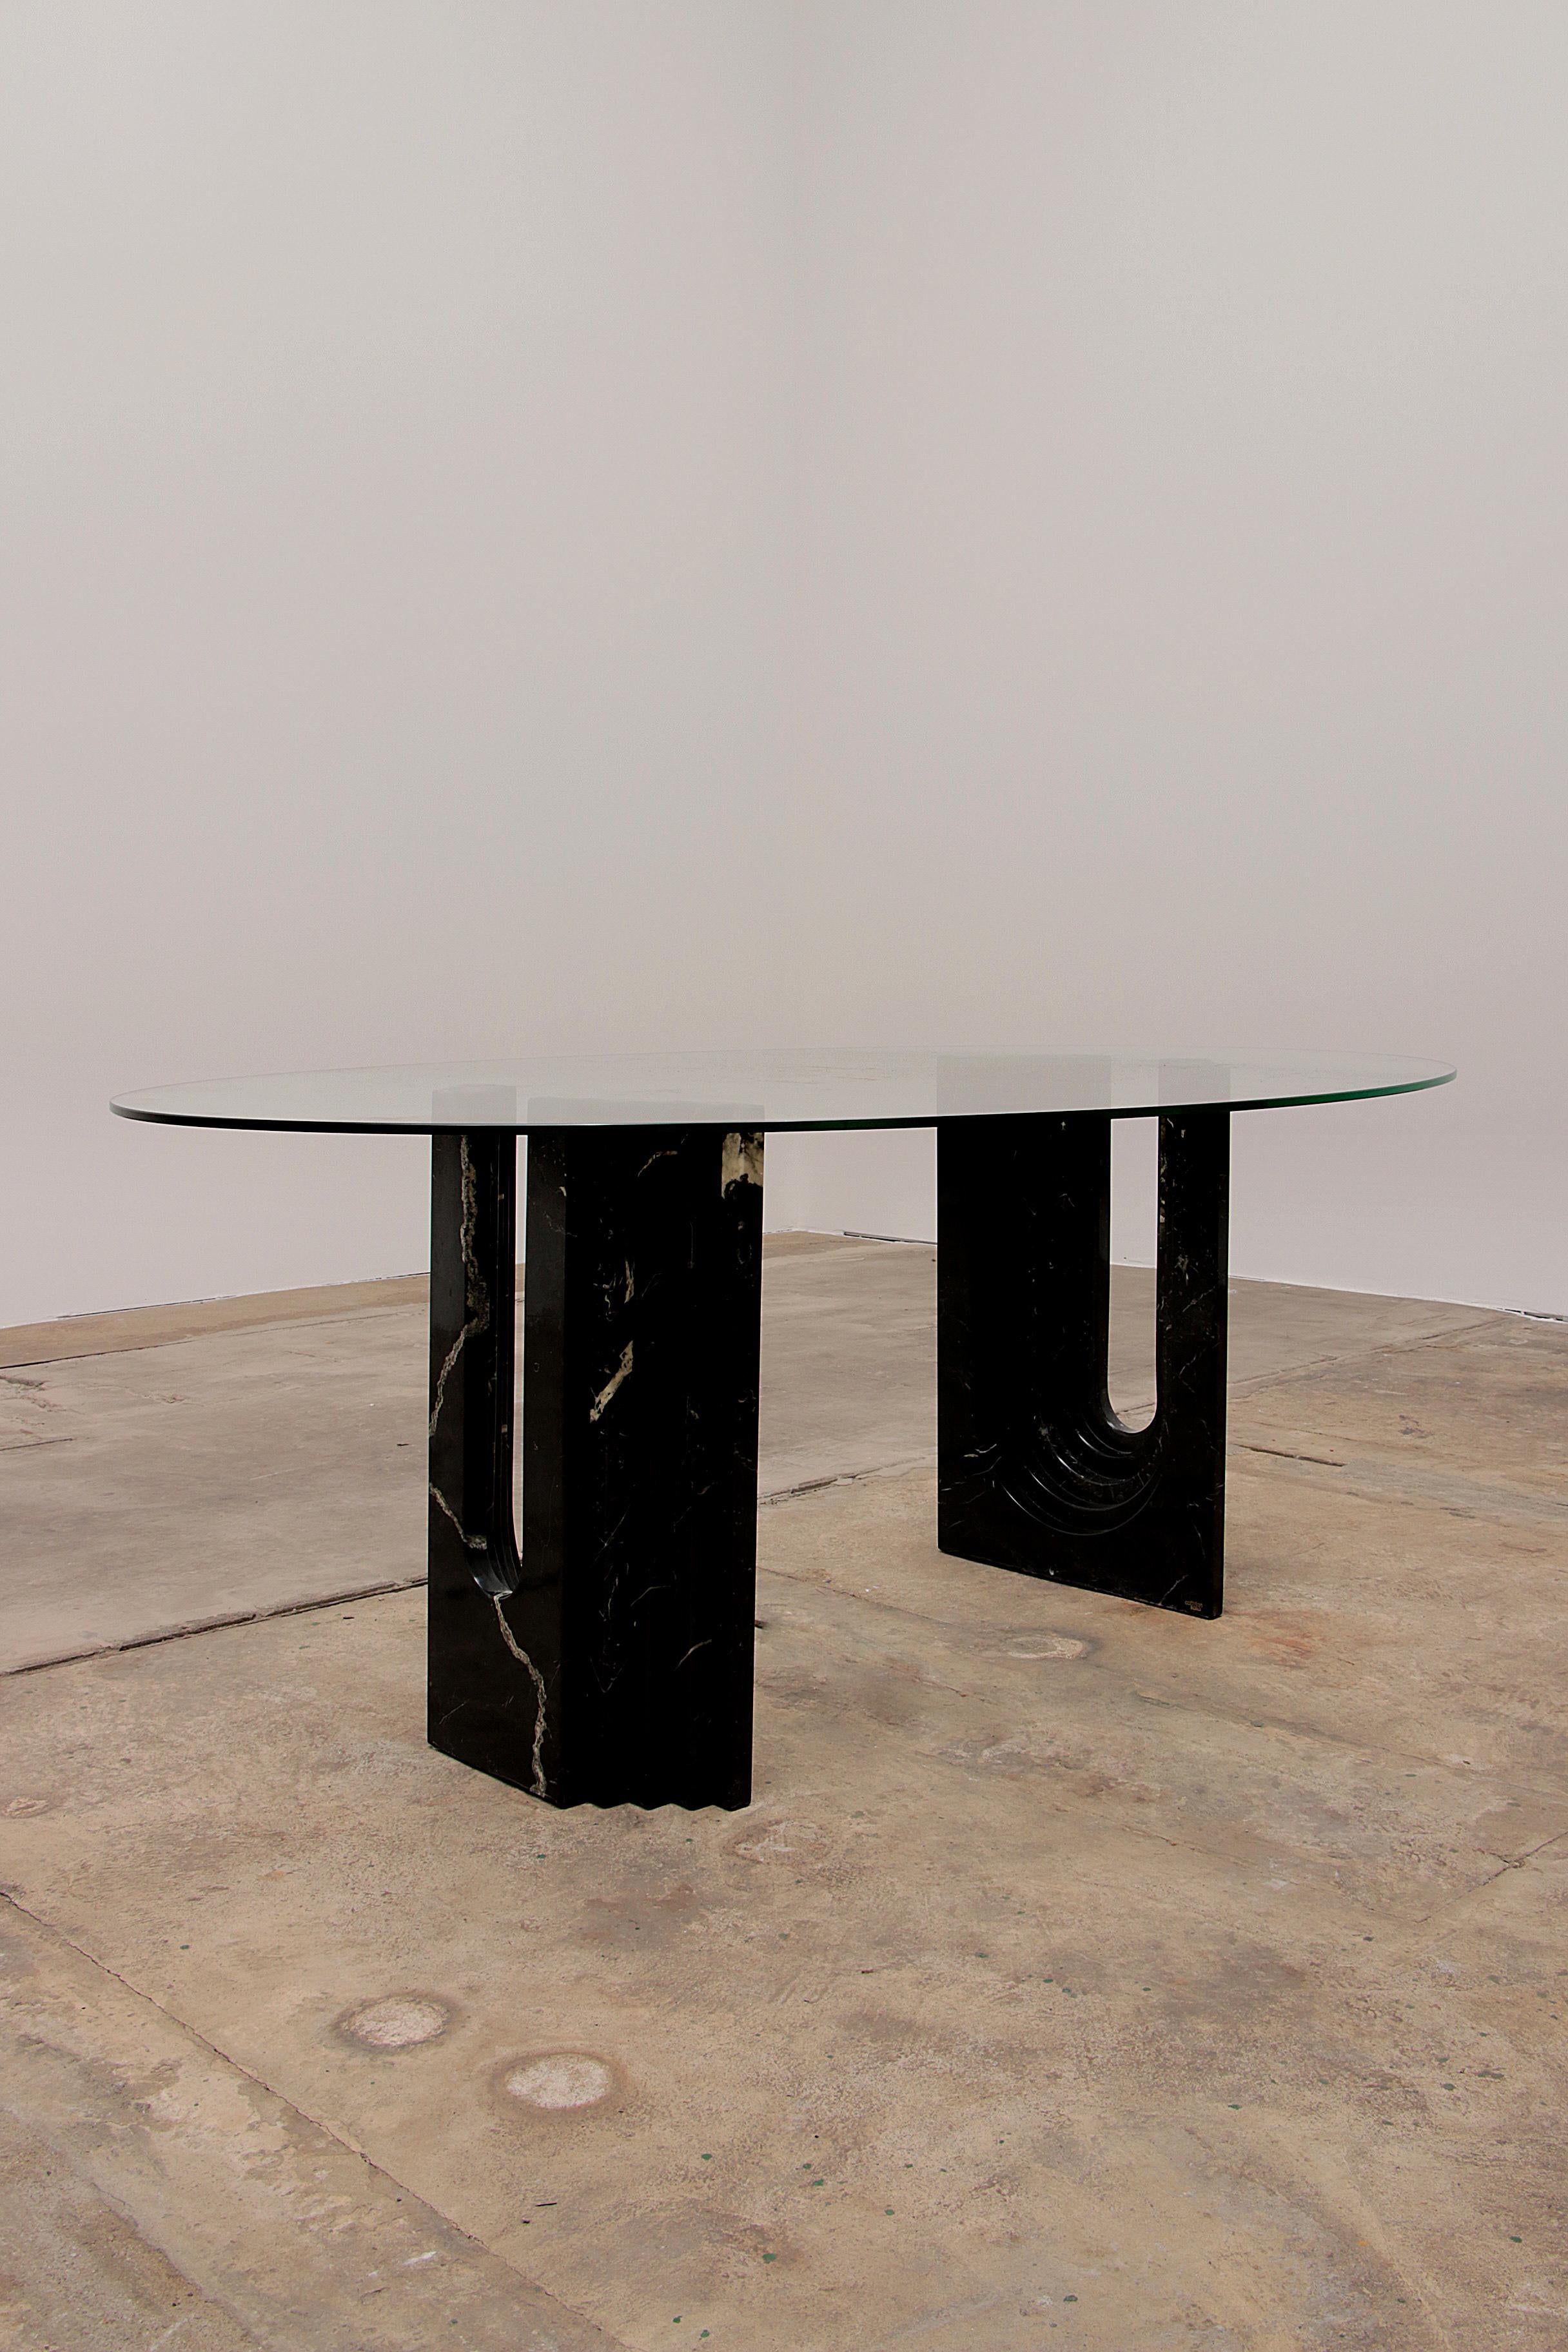 An iconic table designed by the legendary architect and designer Carlo Scarpa for Cattelan Italia in the 1960s. This particular table has a later production date somewhere in the late 1970s or early 1980s. The leg bases are made of a type of marble